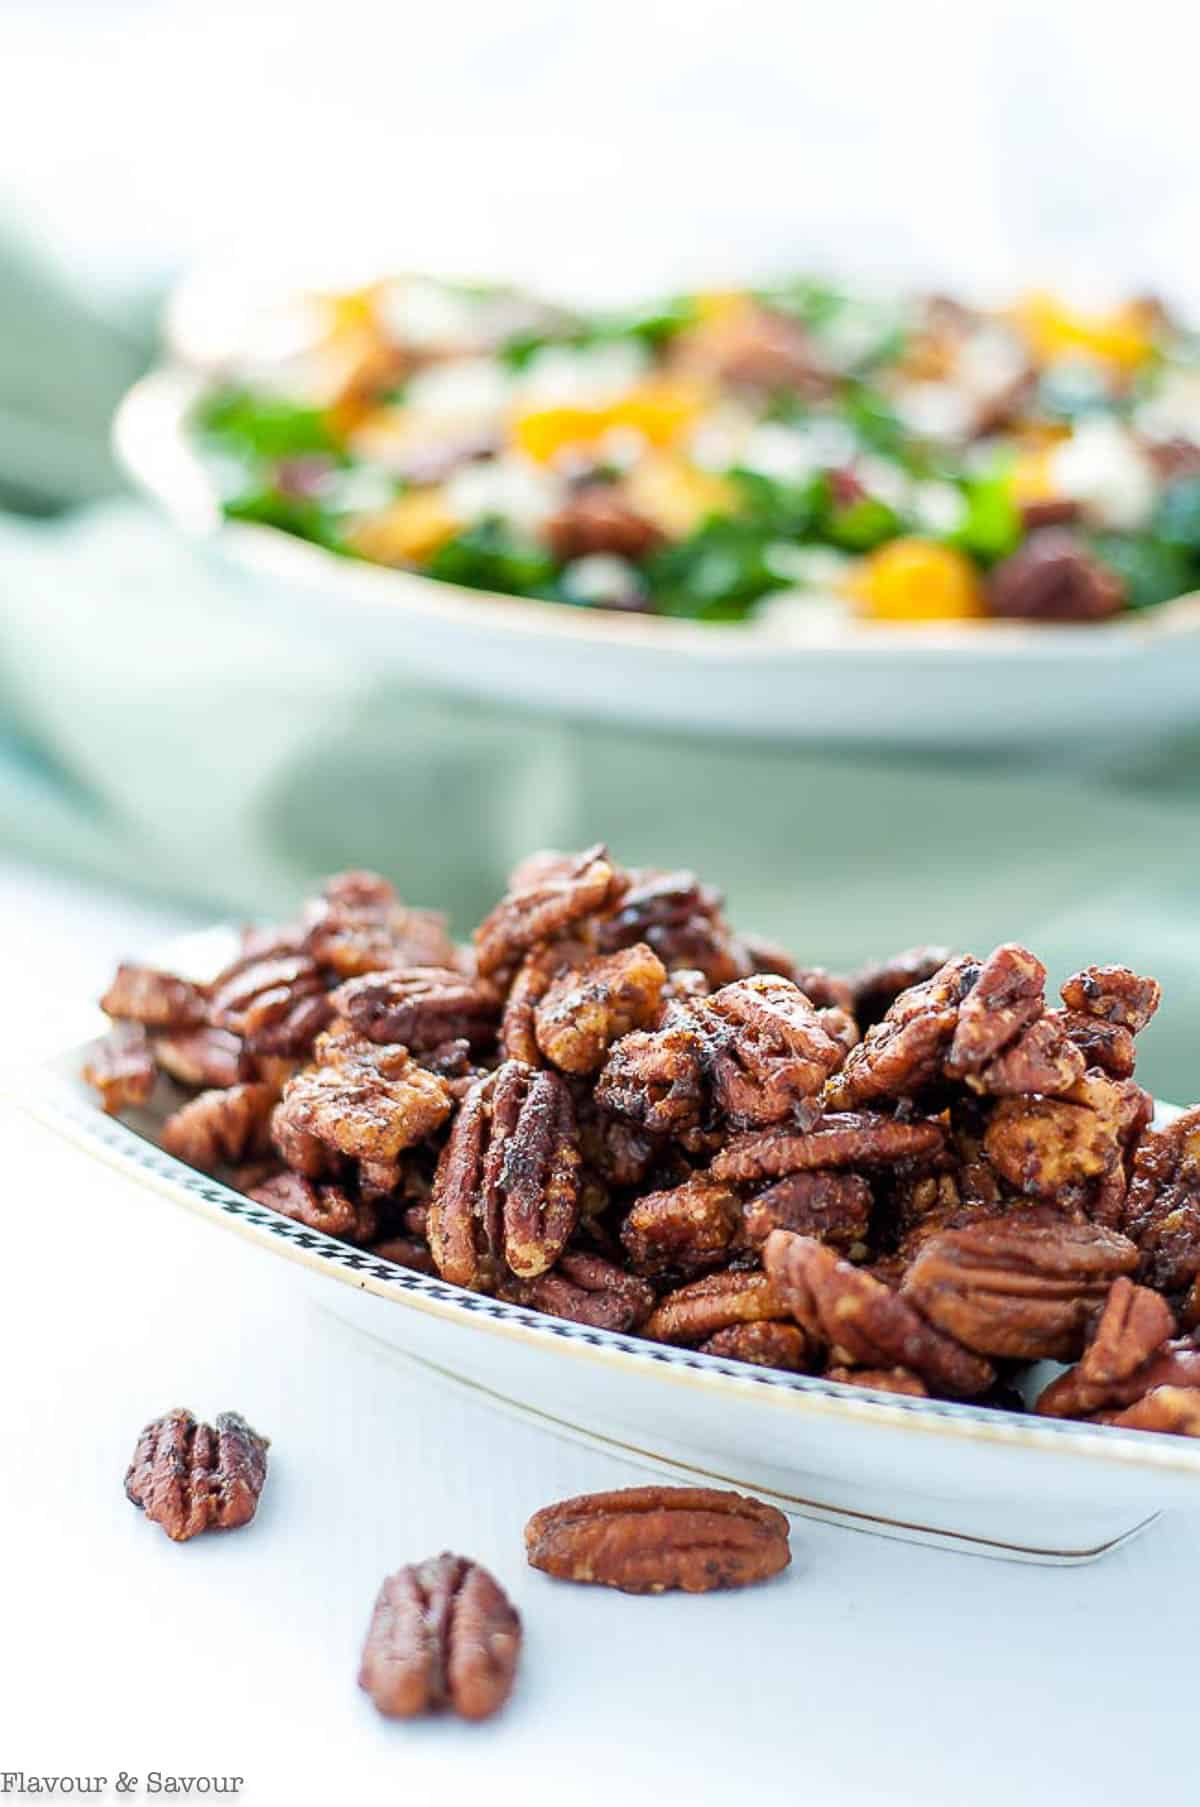 A serving dish of caramel spiced pecans with a salad in the background.